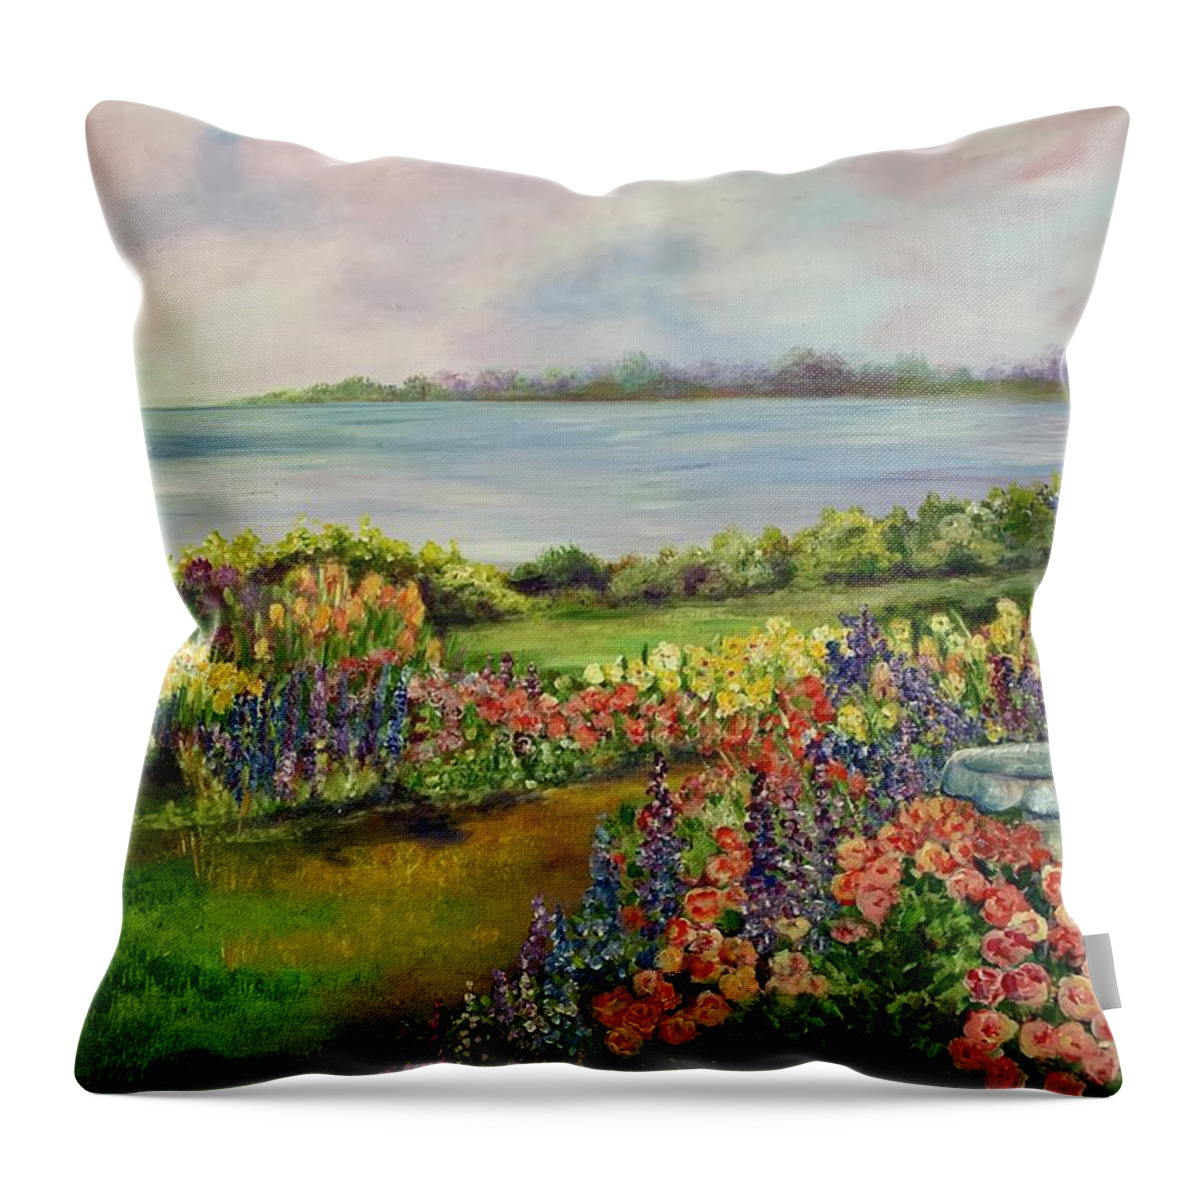 Garden Throw Pillow featuring the painting River View Garden by Barbara Landry